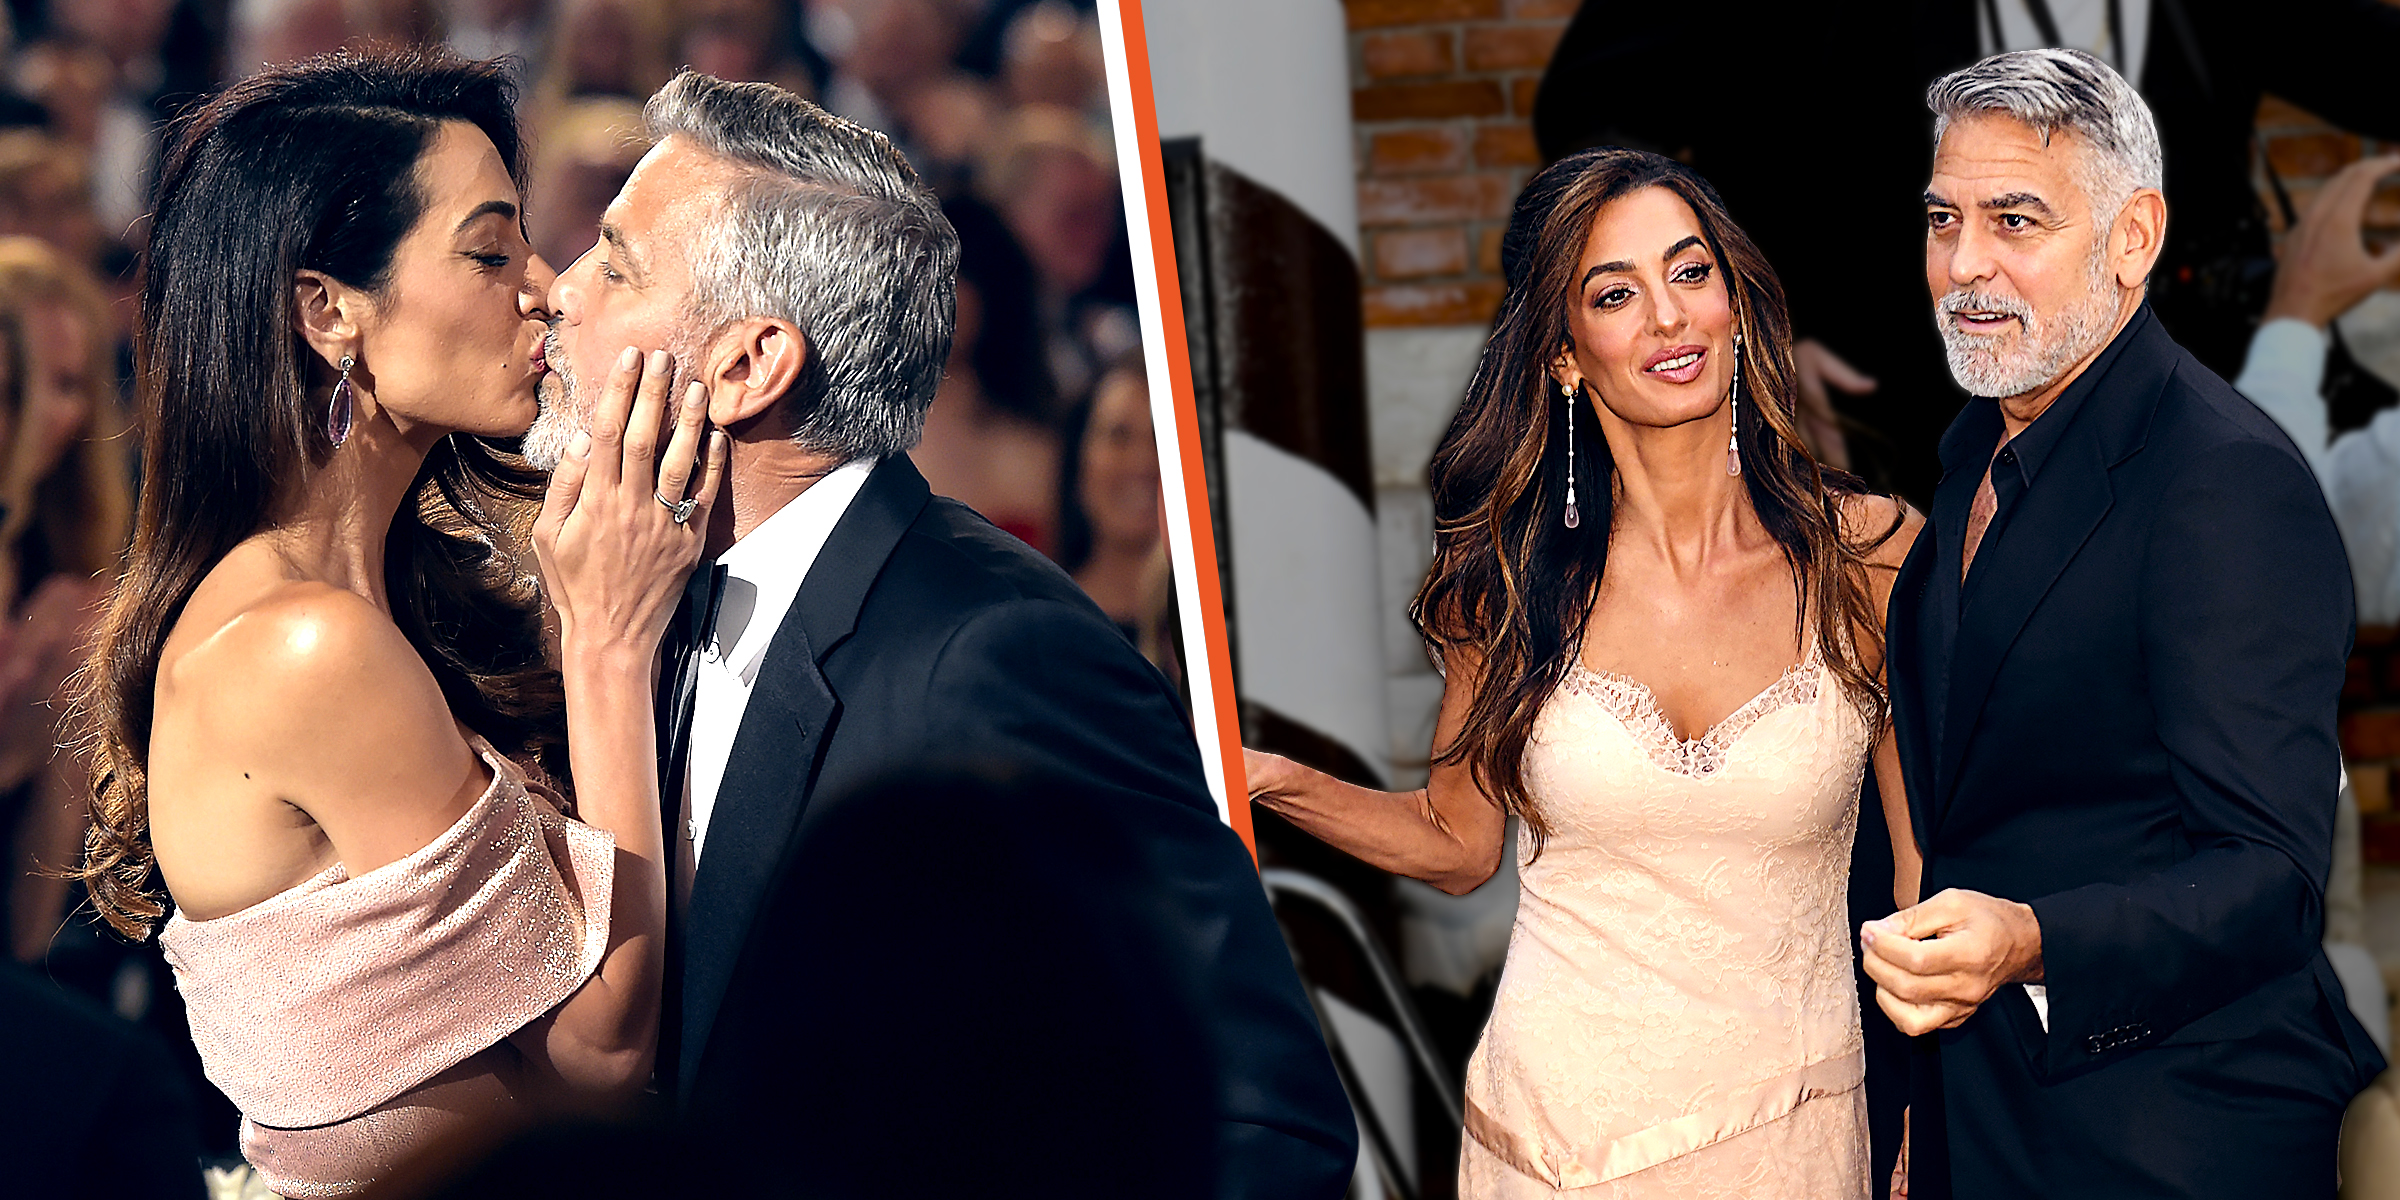 Amal and George Clooney | Source: Getty Images